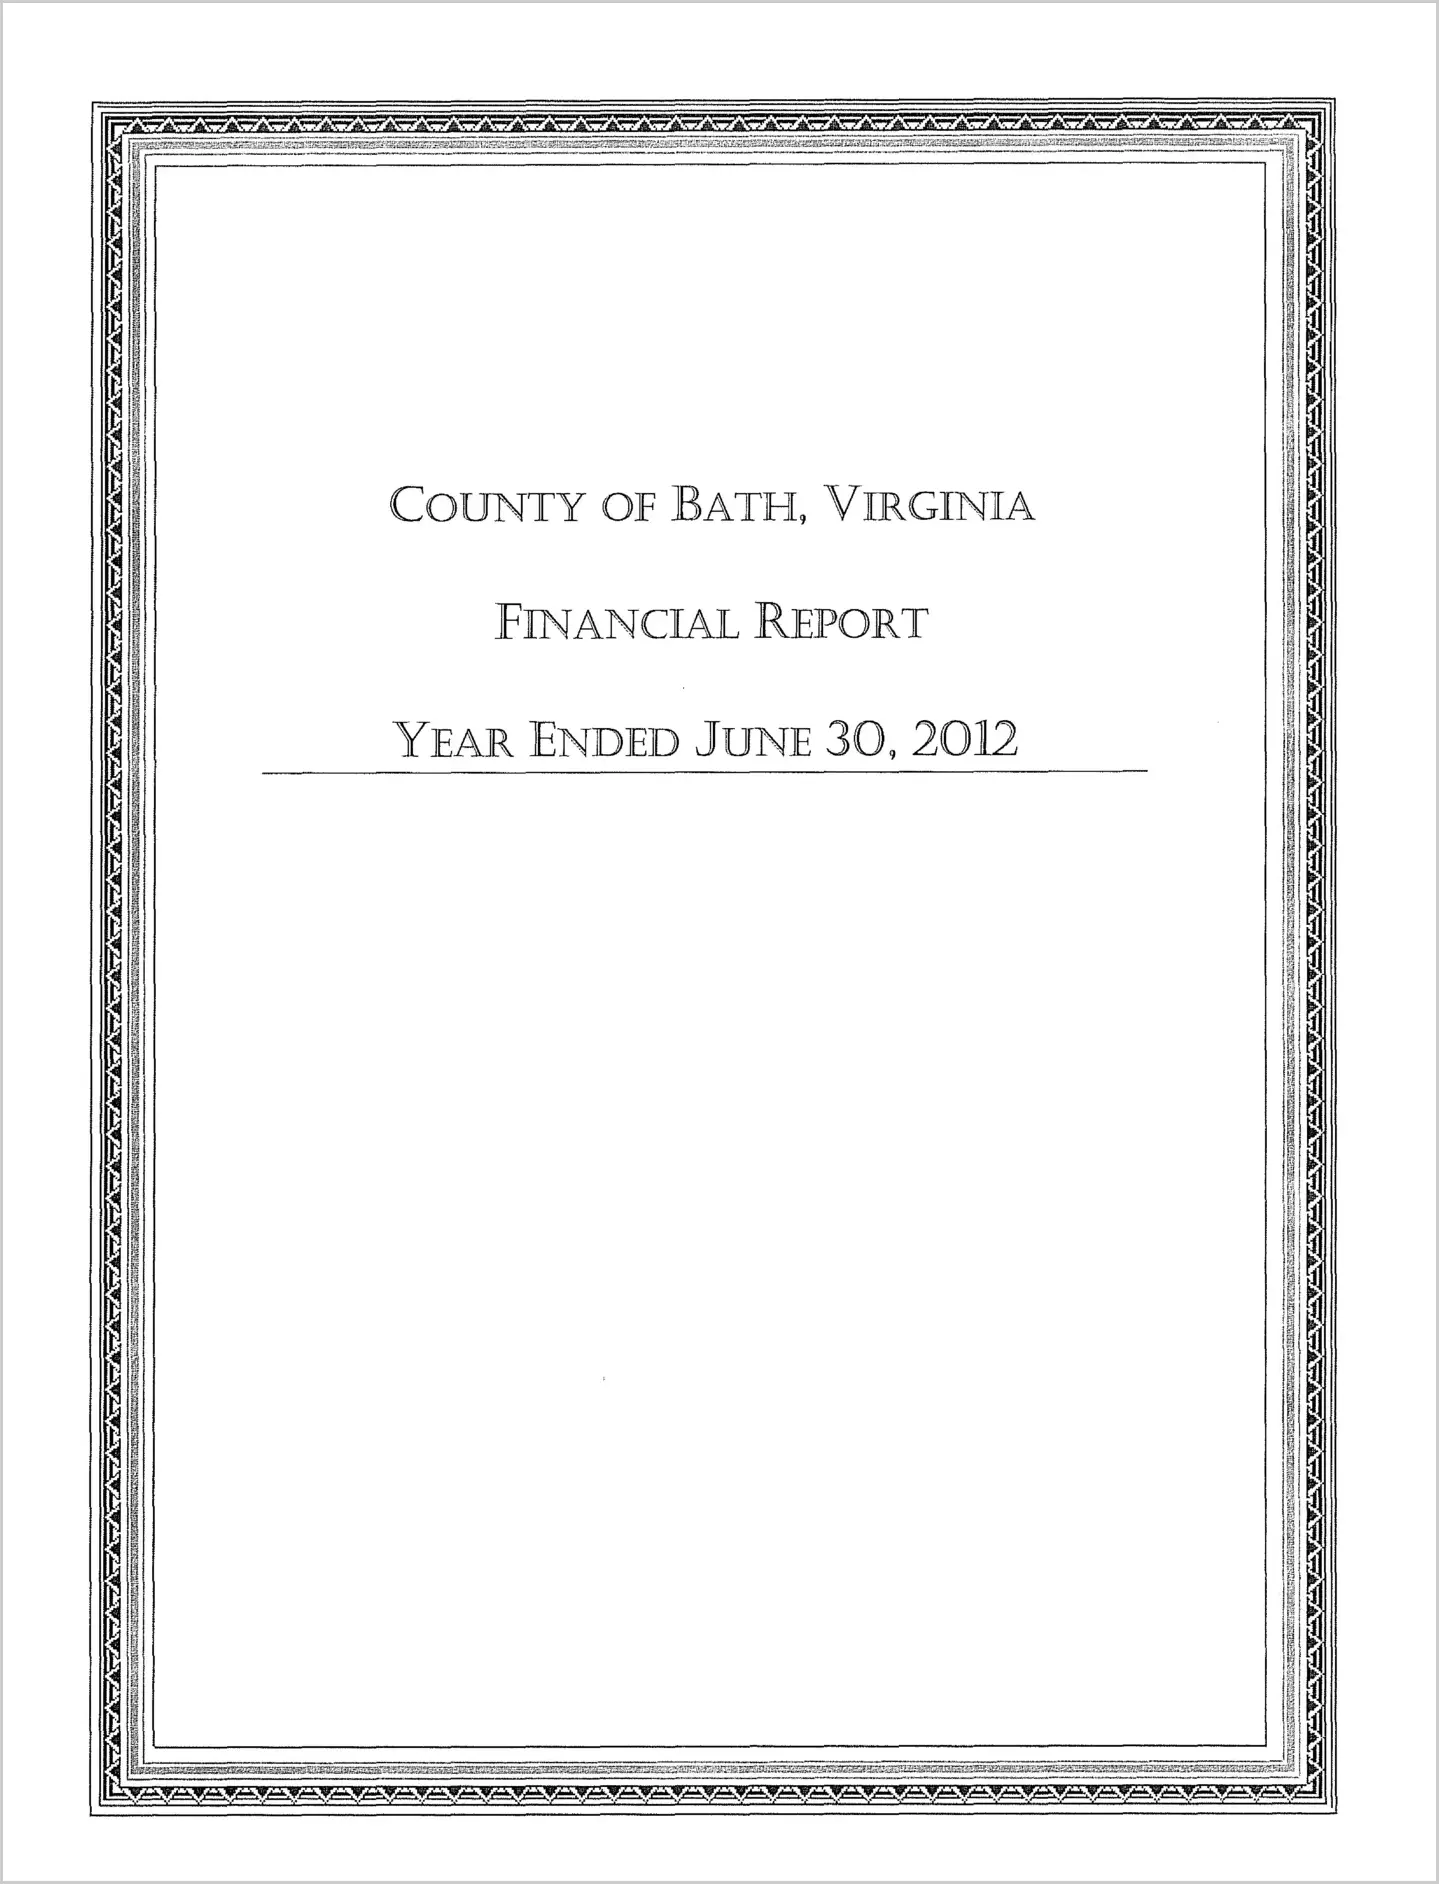 2012 Annual Financial Report for County of Bath